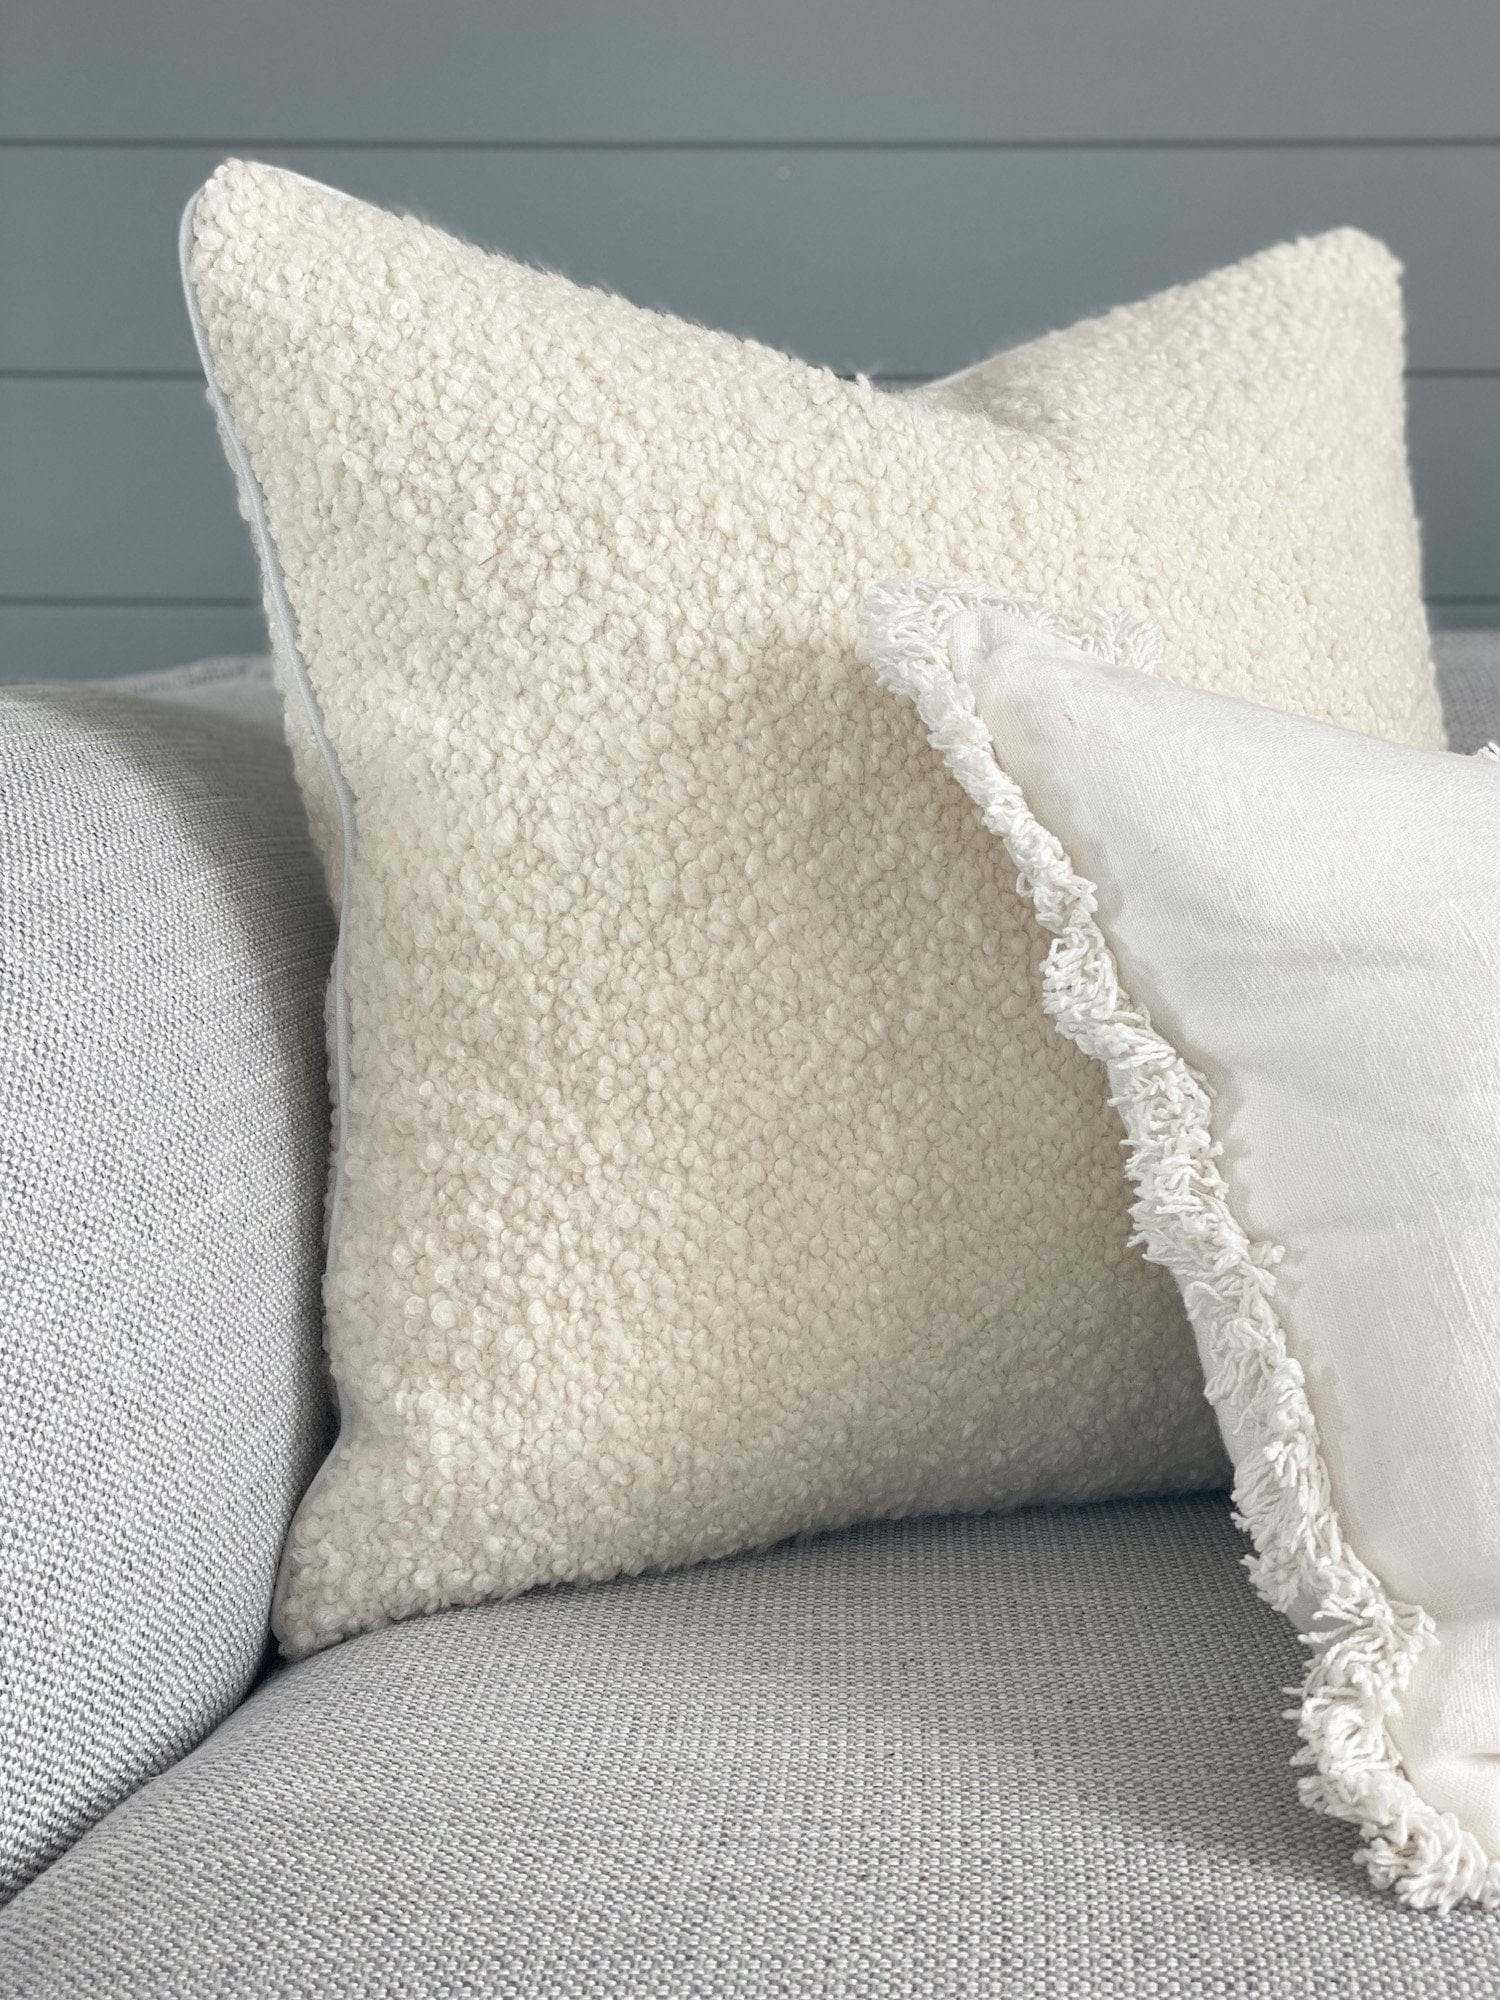 norsuHOME Cushions norsuHOME Bouclé Cushion, Ivory with White Leather Piping (6289976295612)